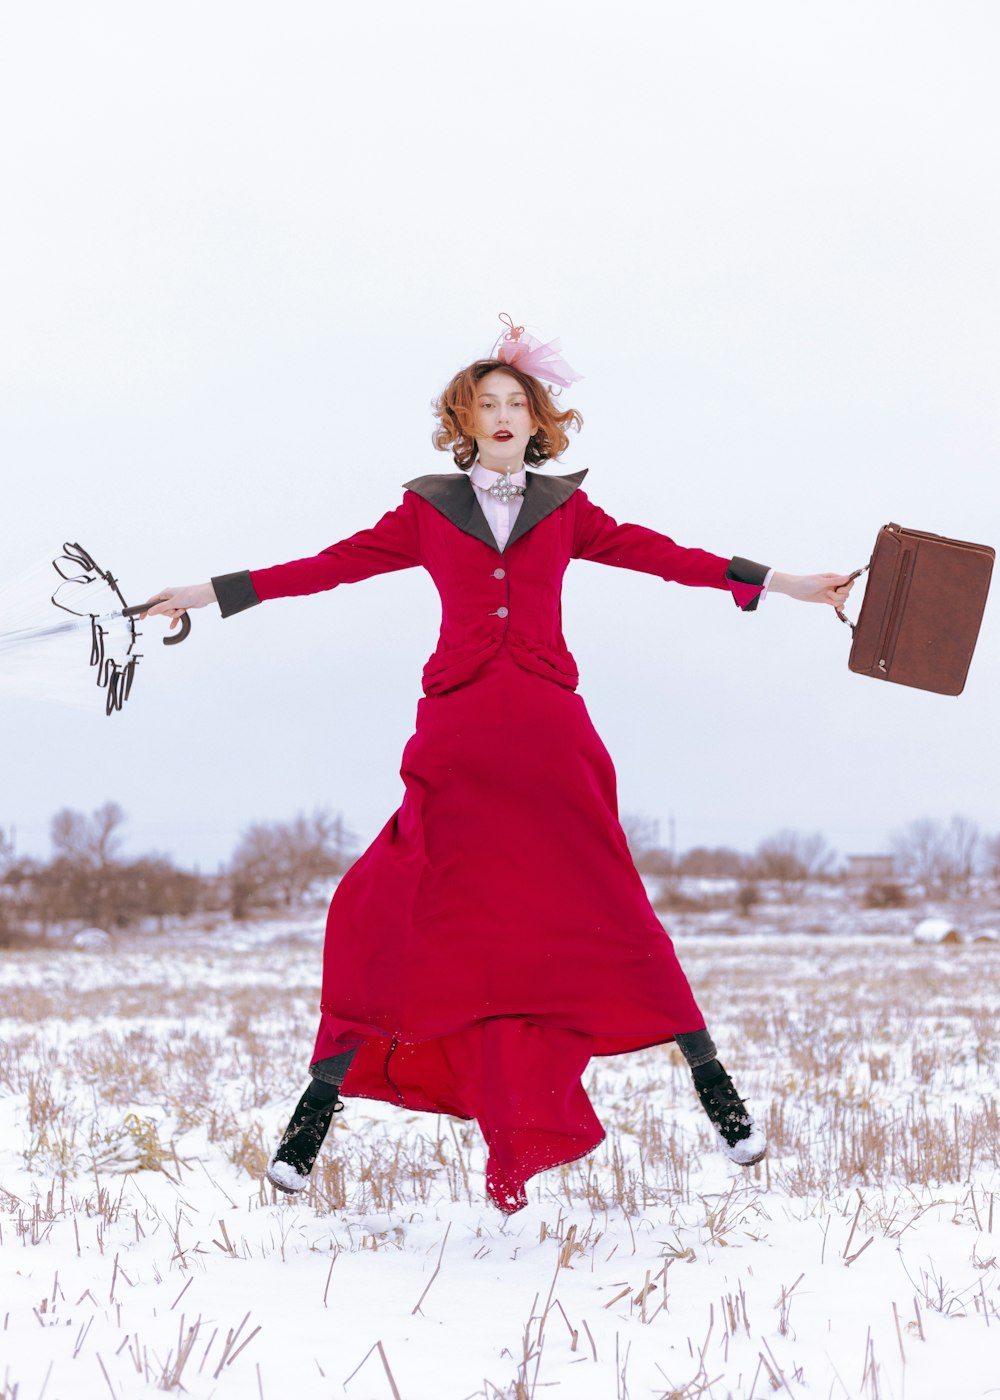 a person in a red dress holding a box in a snowy field